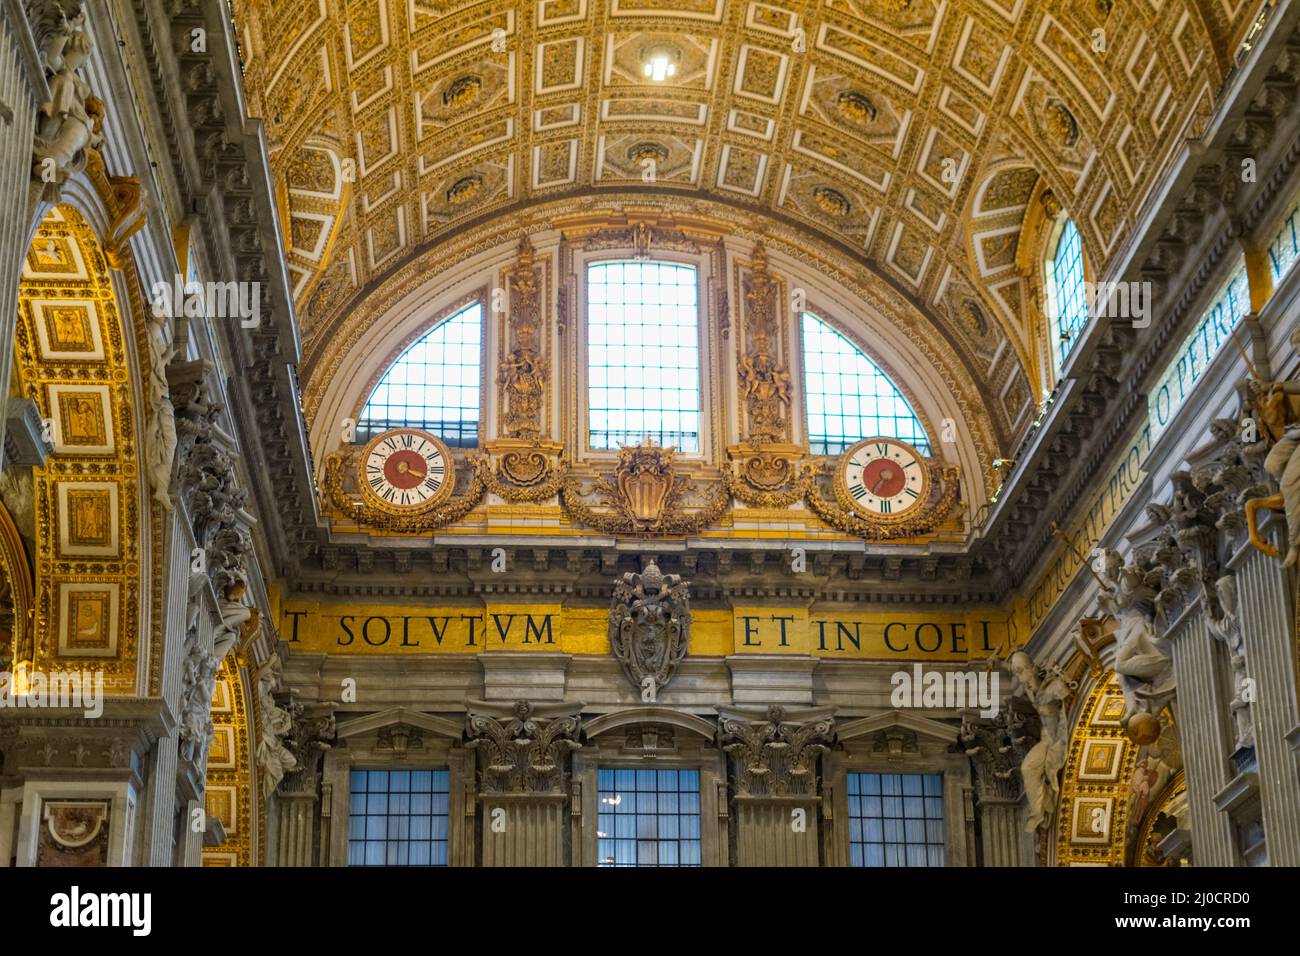 The Gilded Ceiling of St. Peter's Basilica, Vatican, Italy Stock Photo